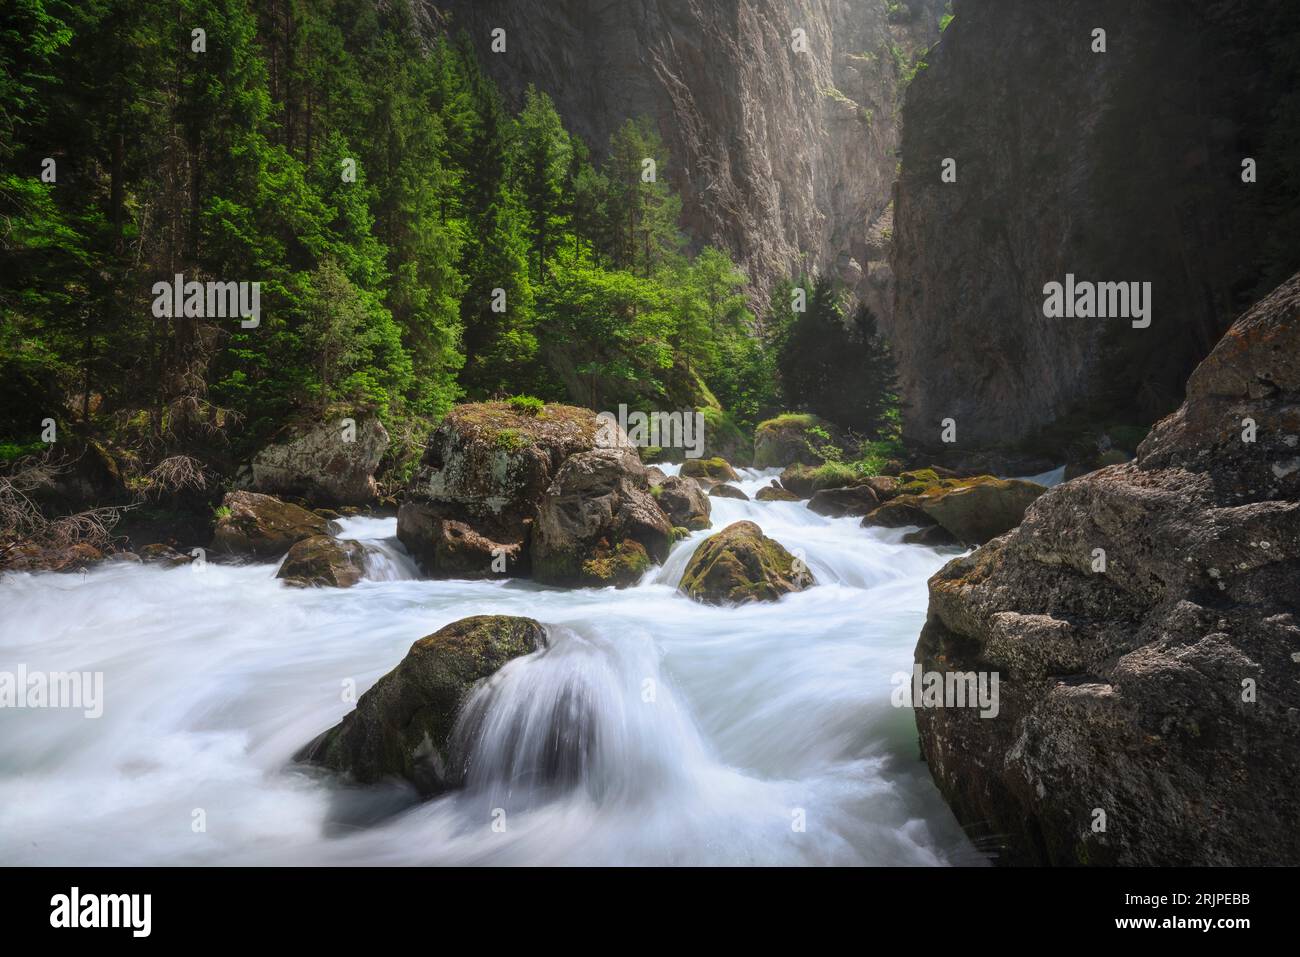 The stream in the Orrido of Pré Saint Didier, a view in summer of this deep ravine in Aosta valley. Italy. Stock Photo